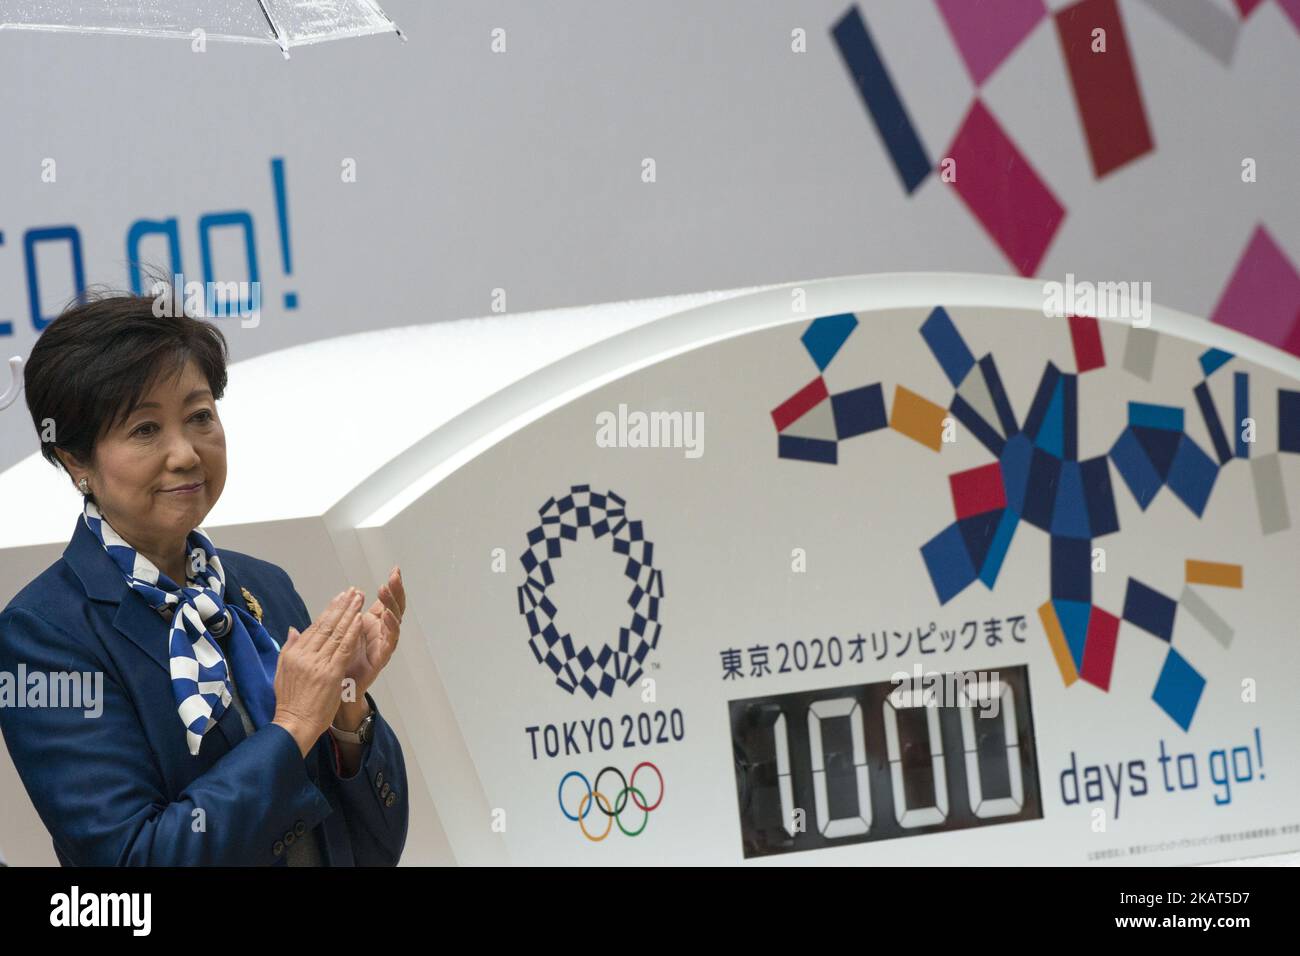 Tokyo Governor and head of Party of Hope Yuriko Koike claps her hands as she attend an unveiling the display counting down the days to the beginning of the 2020 Tokyo Olympic Games, at the the countdown ceremony to mark 1,000 days until the 2020 Tokyo Olympic Games in Tokyo, Japan October 28, 2017. (Photo by Alessandro Di Ciommo/NurPhoto) Stock Photo